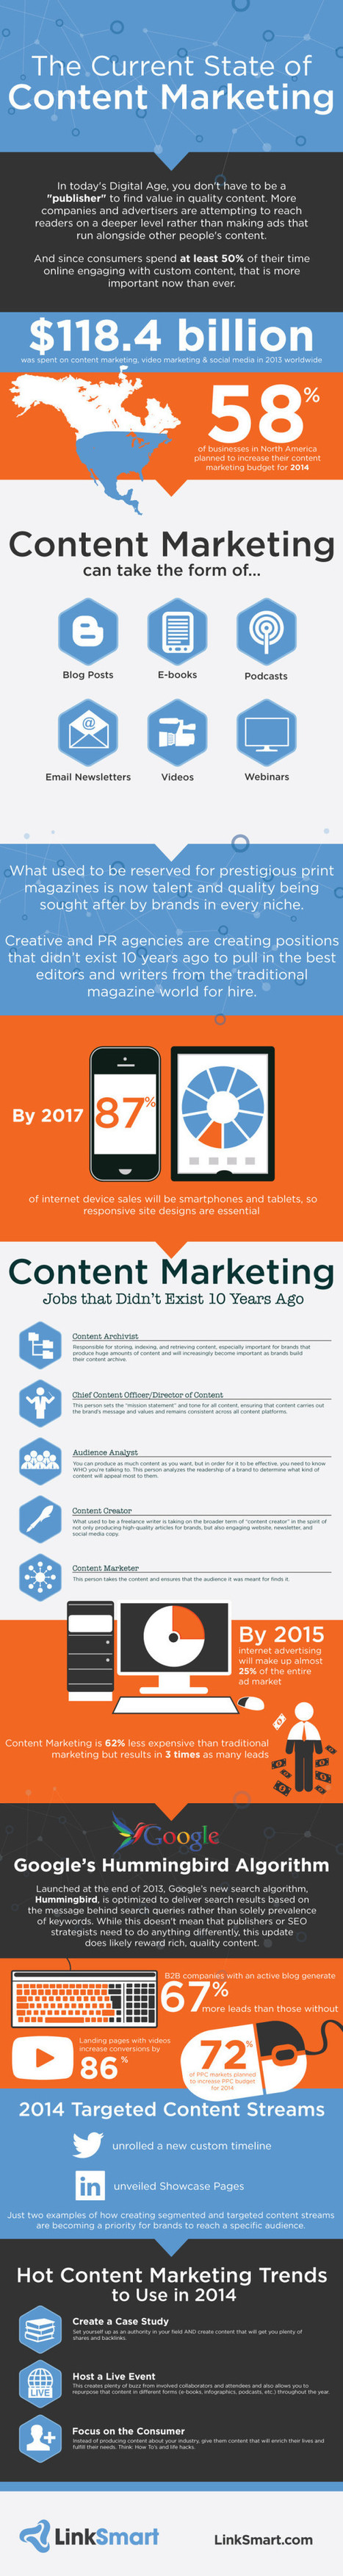 The Current State of Content Marketing 2014 - Marketing Technology Blog | e-commerce & social media | Scoop.it